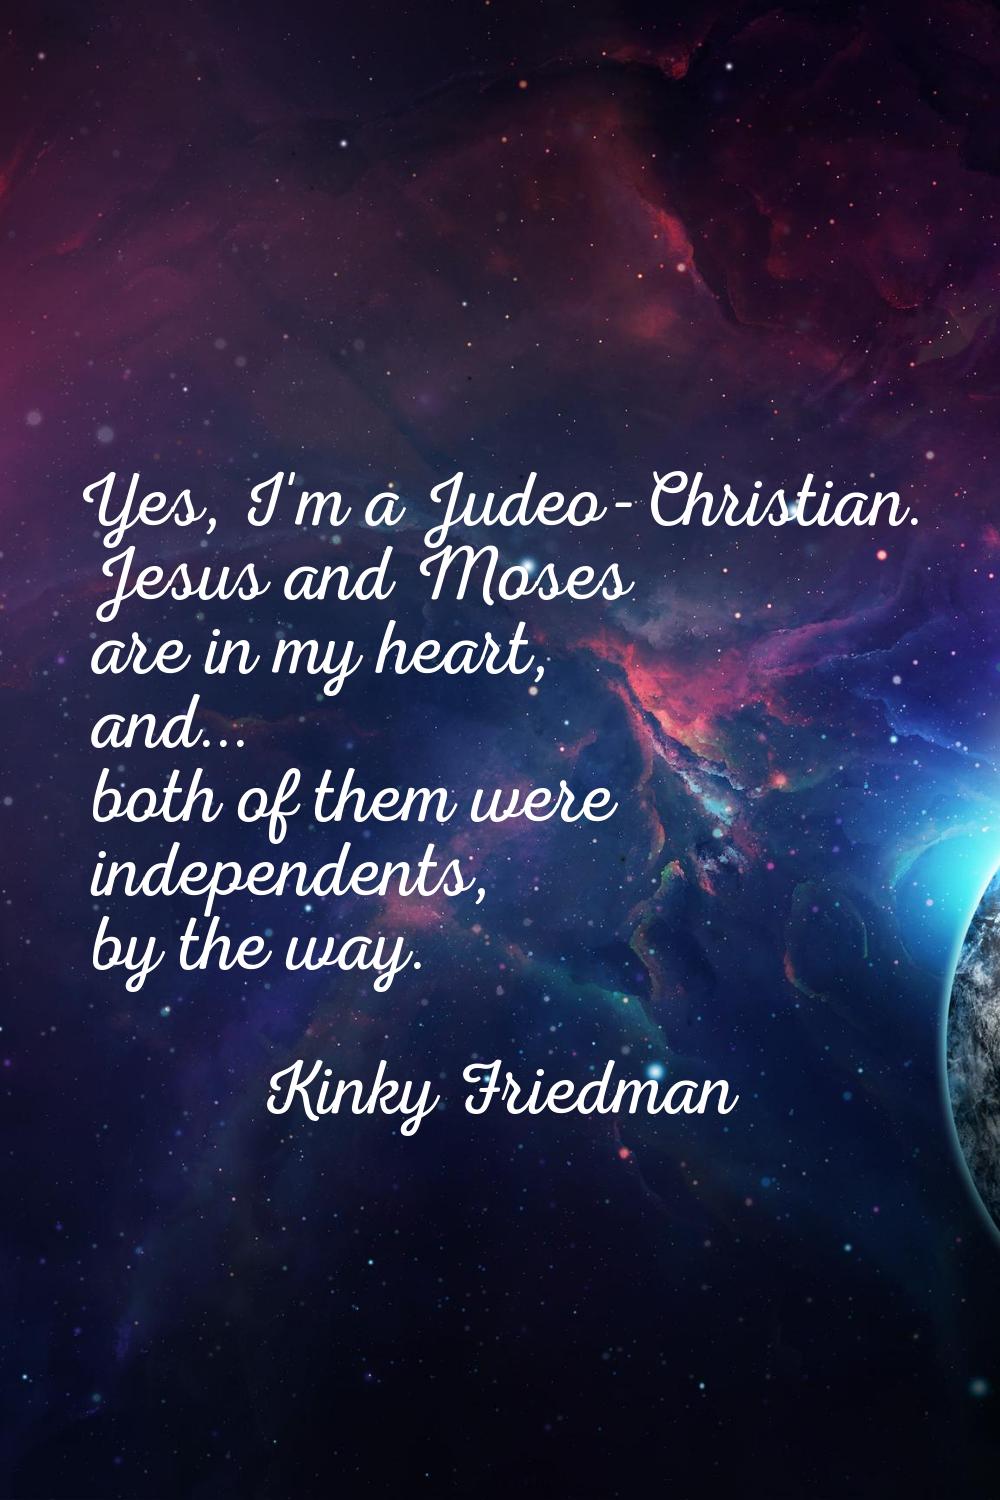 Yes, I'm a Judeo-Christian. Jesus and Moses are in my heart, and... both of them were independents,